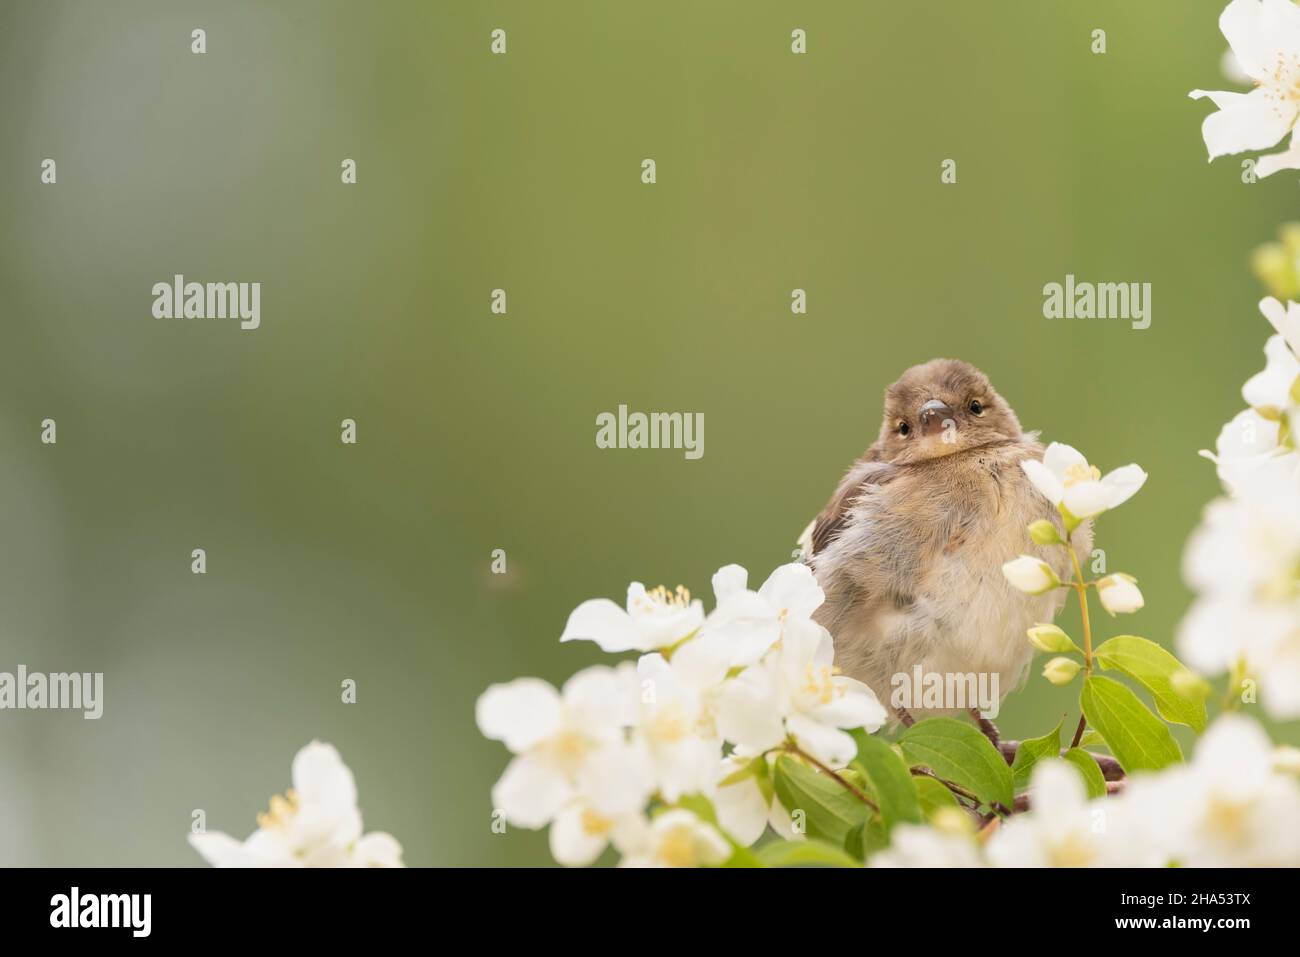 young bullfinch is standing on branch with jasmine flowers Stock Photo